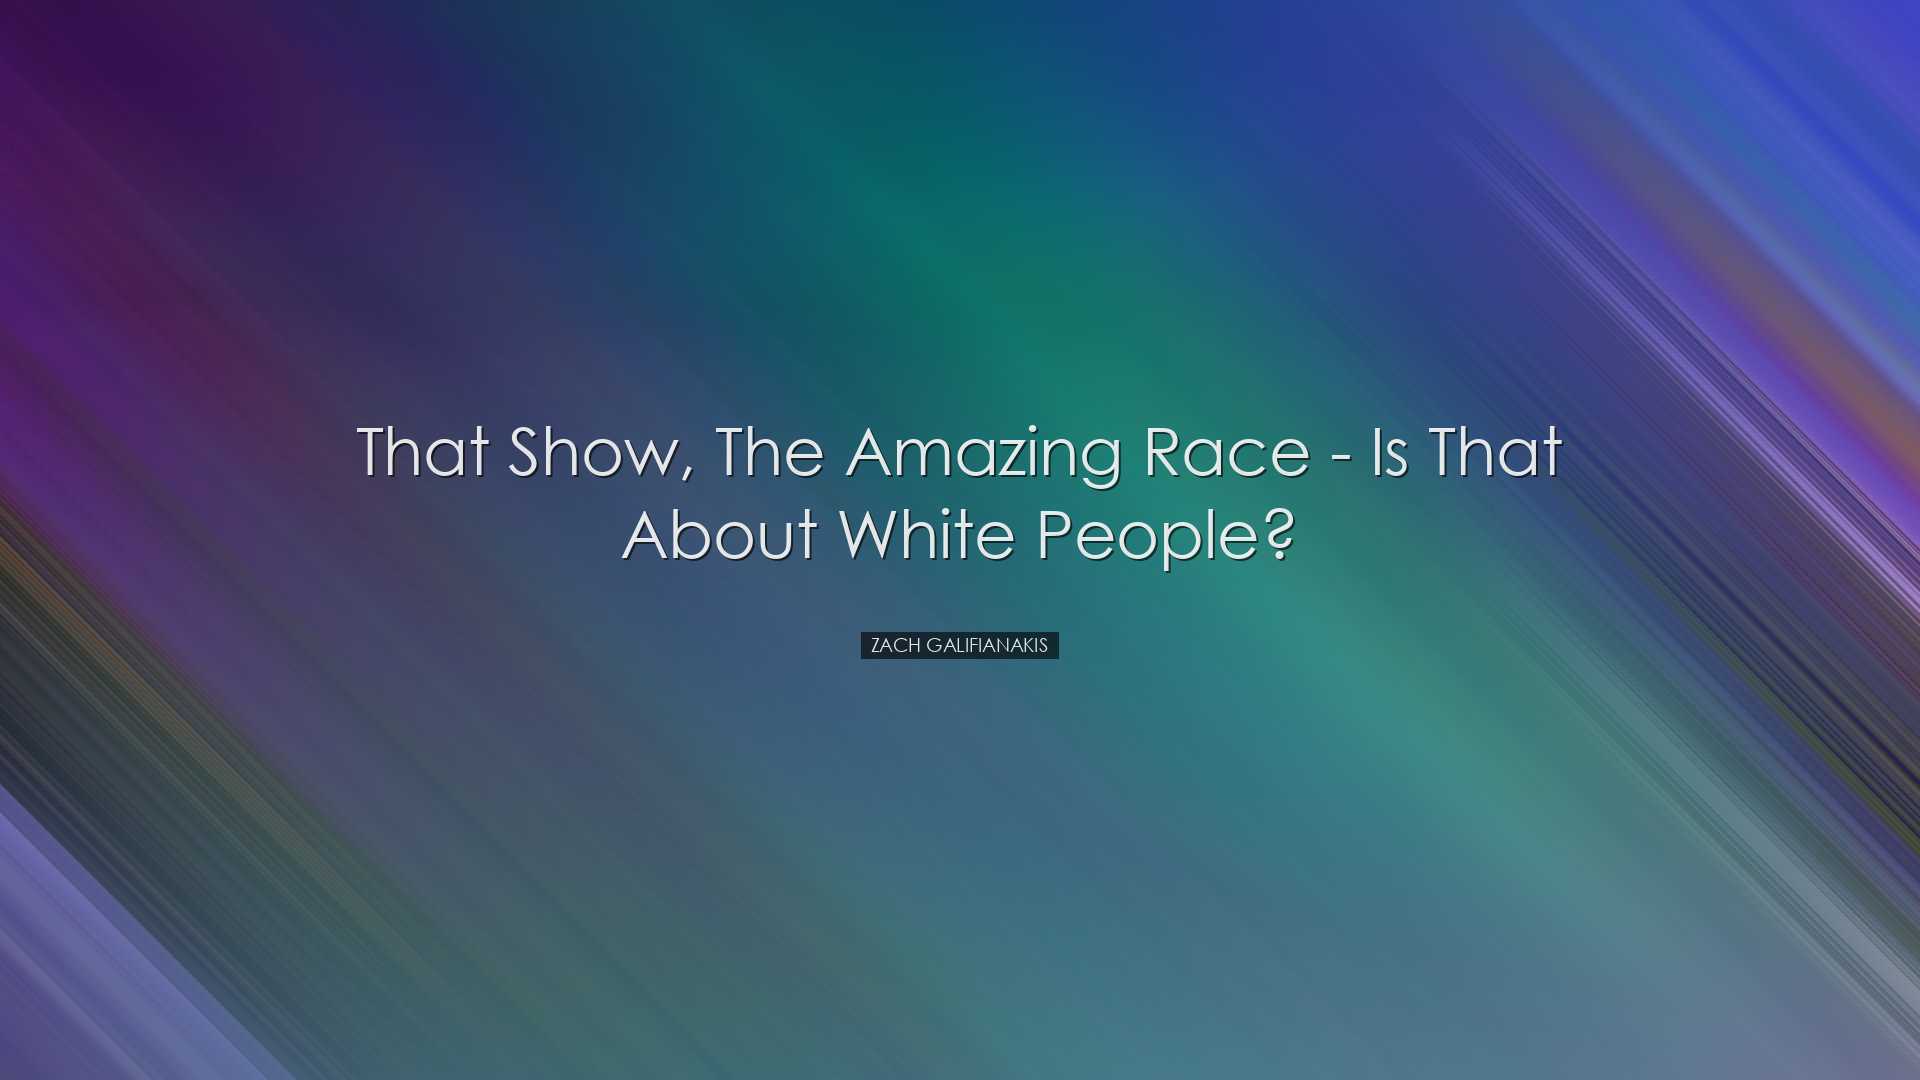 That show, The Amazing Race - is that about white people? - Zach G